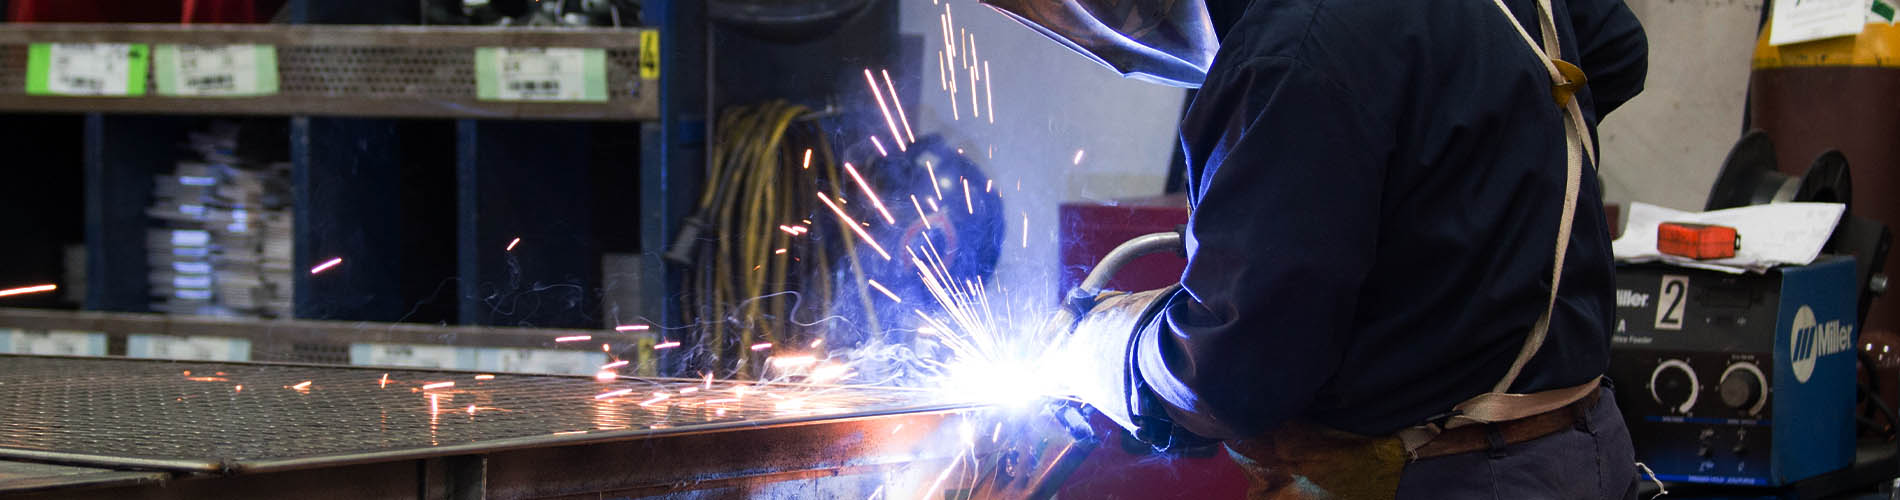 A welder using a welding tool, causing sparks to fly.